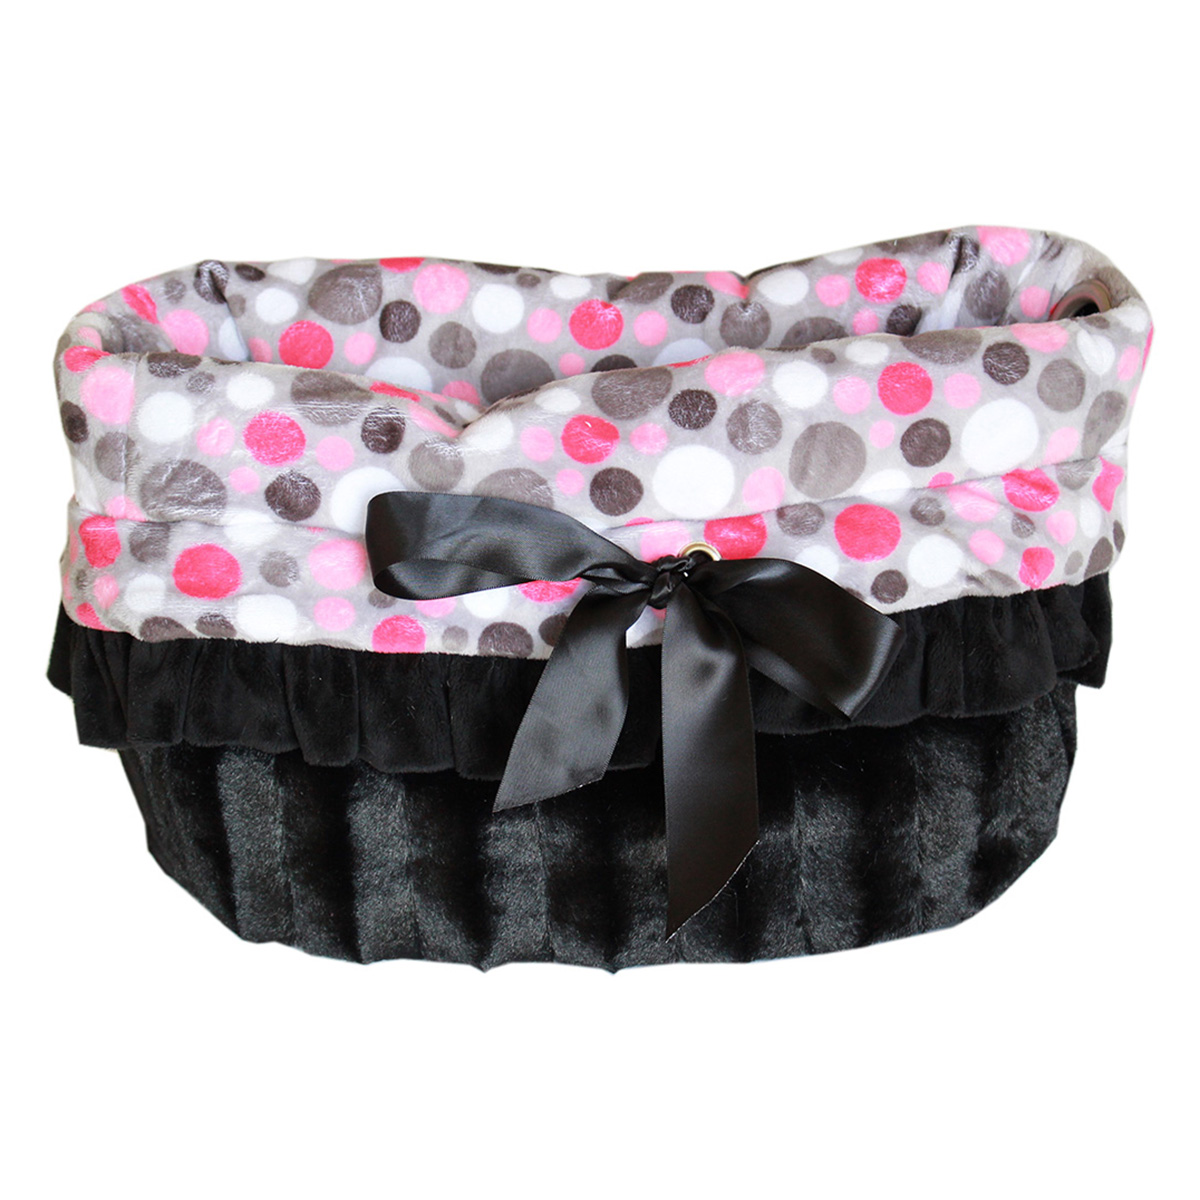 500-113 Reversible Snuggle Bugs Pet Bed, Bag & Car Seat, Pink Party Dots - One Size